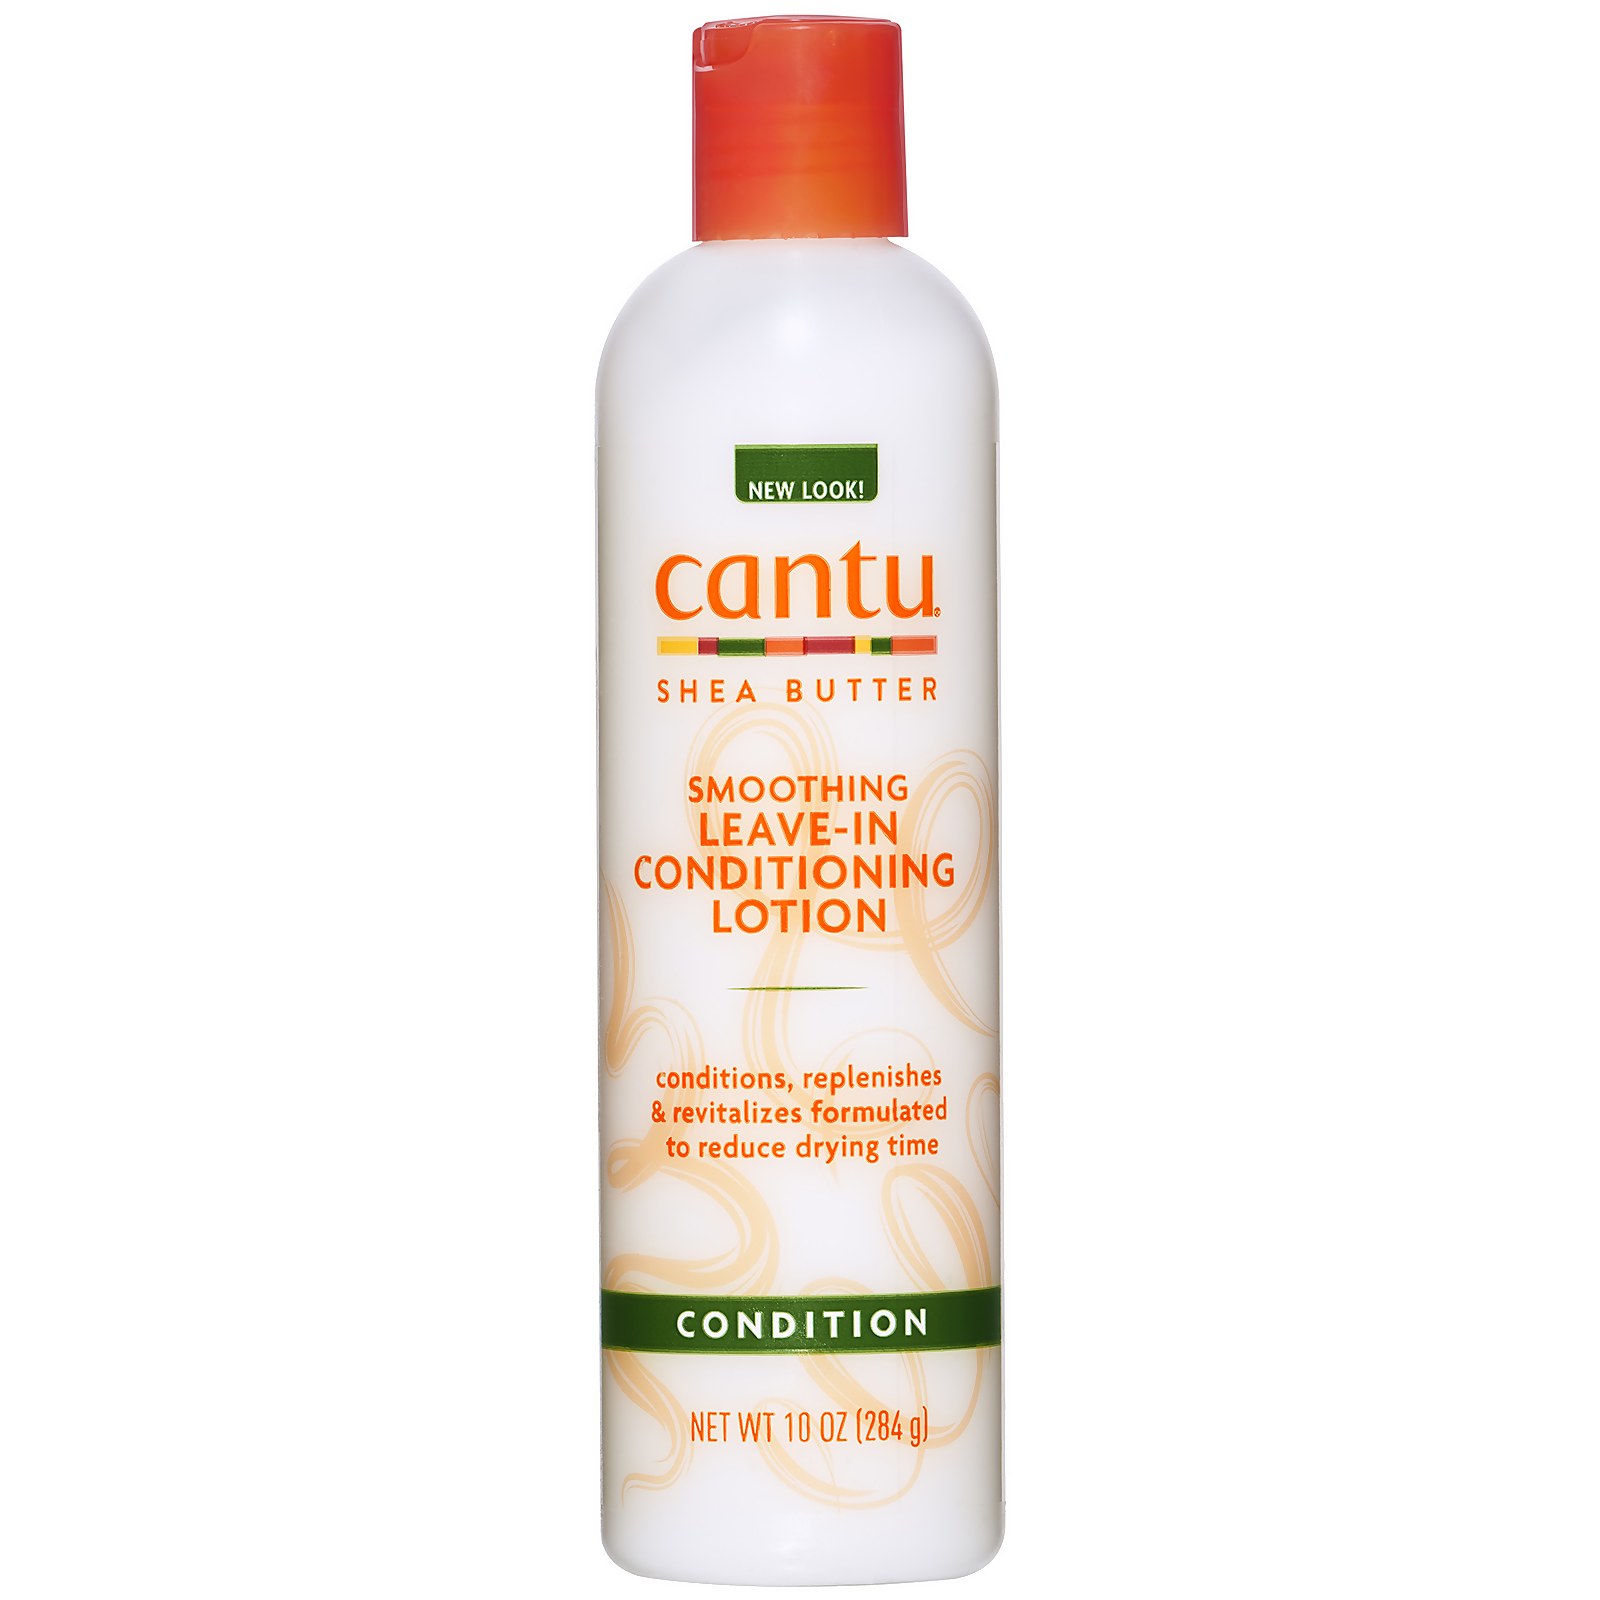 Photos - Hair Product Cantu Shea Butter Smoothing Leave-In Conditioning Lotion 07621-12/3EUS 